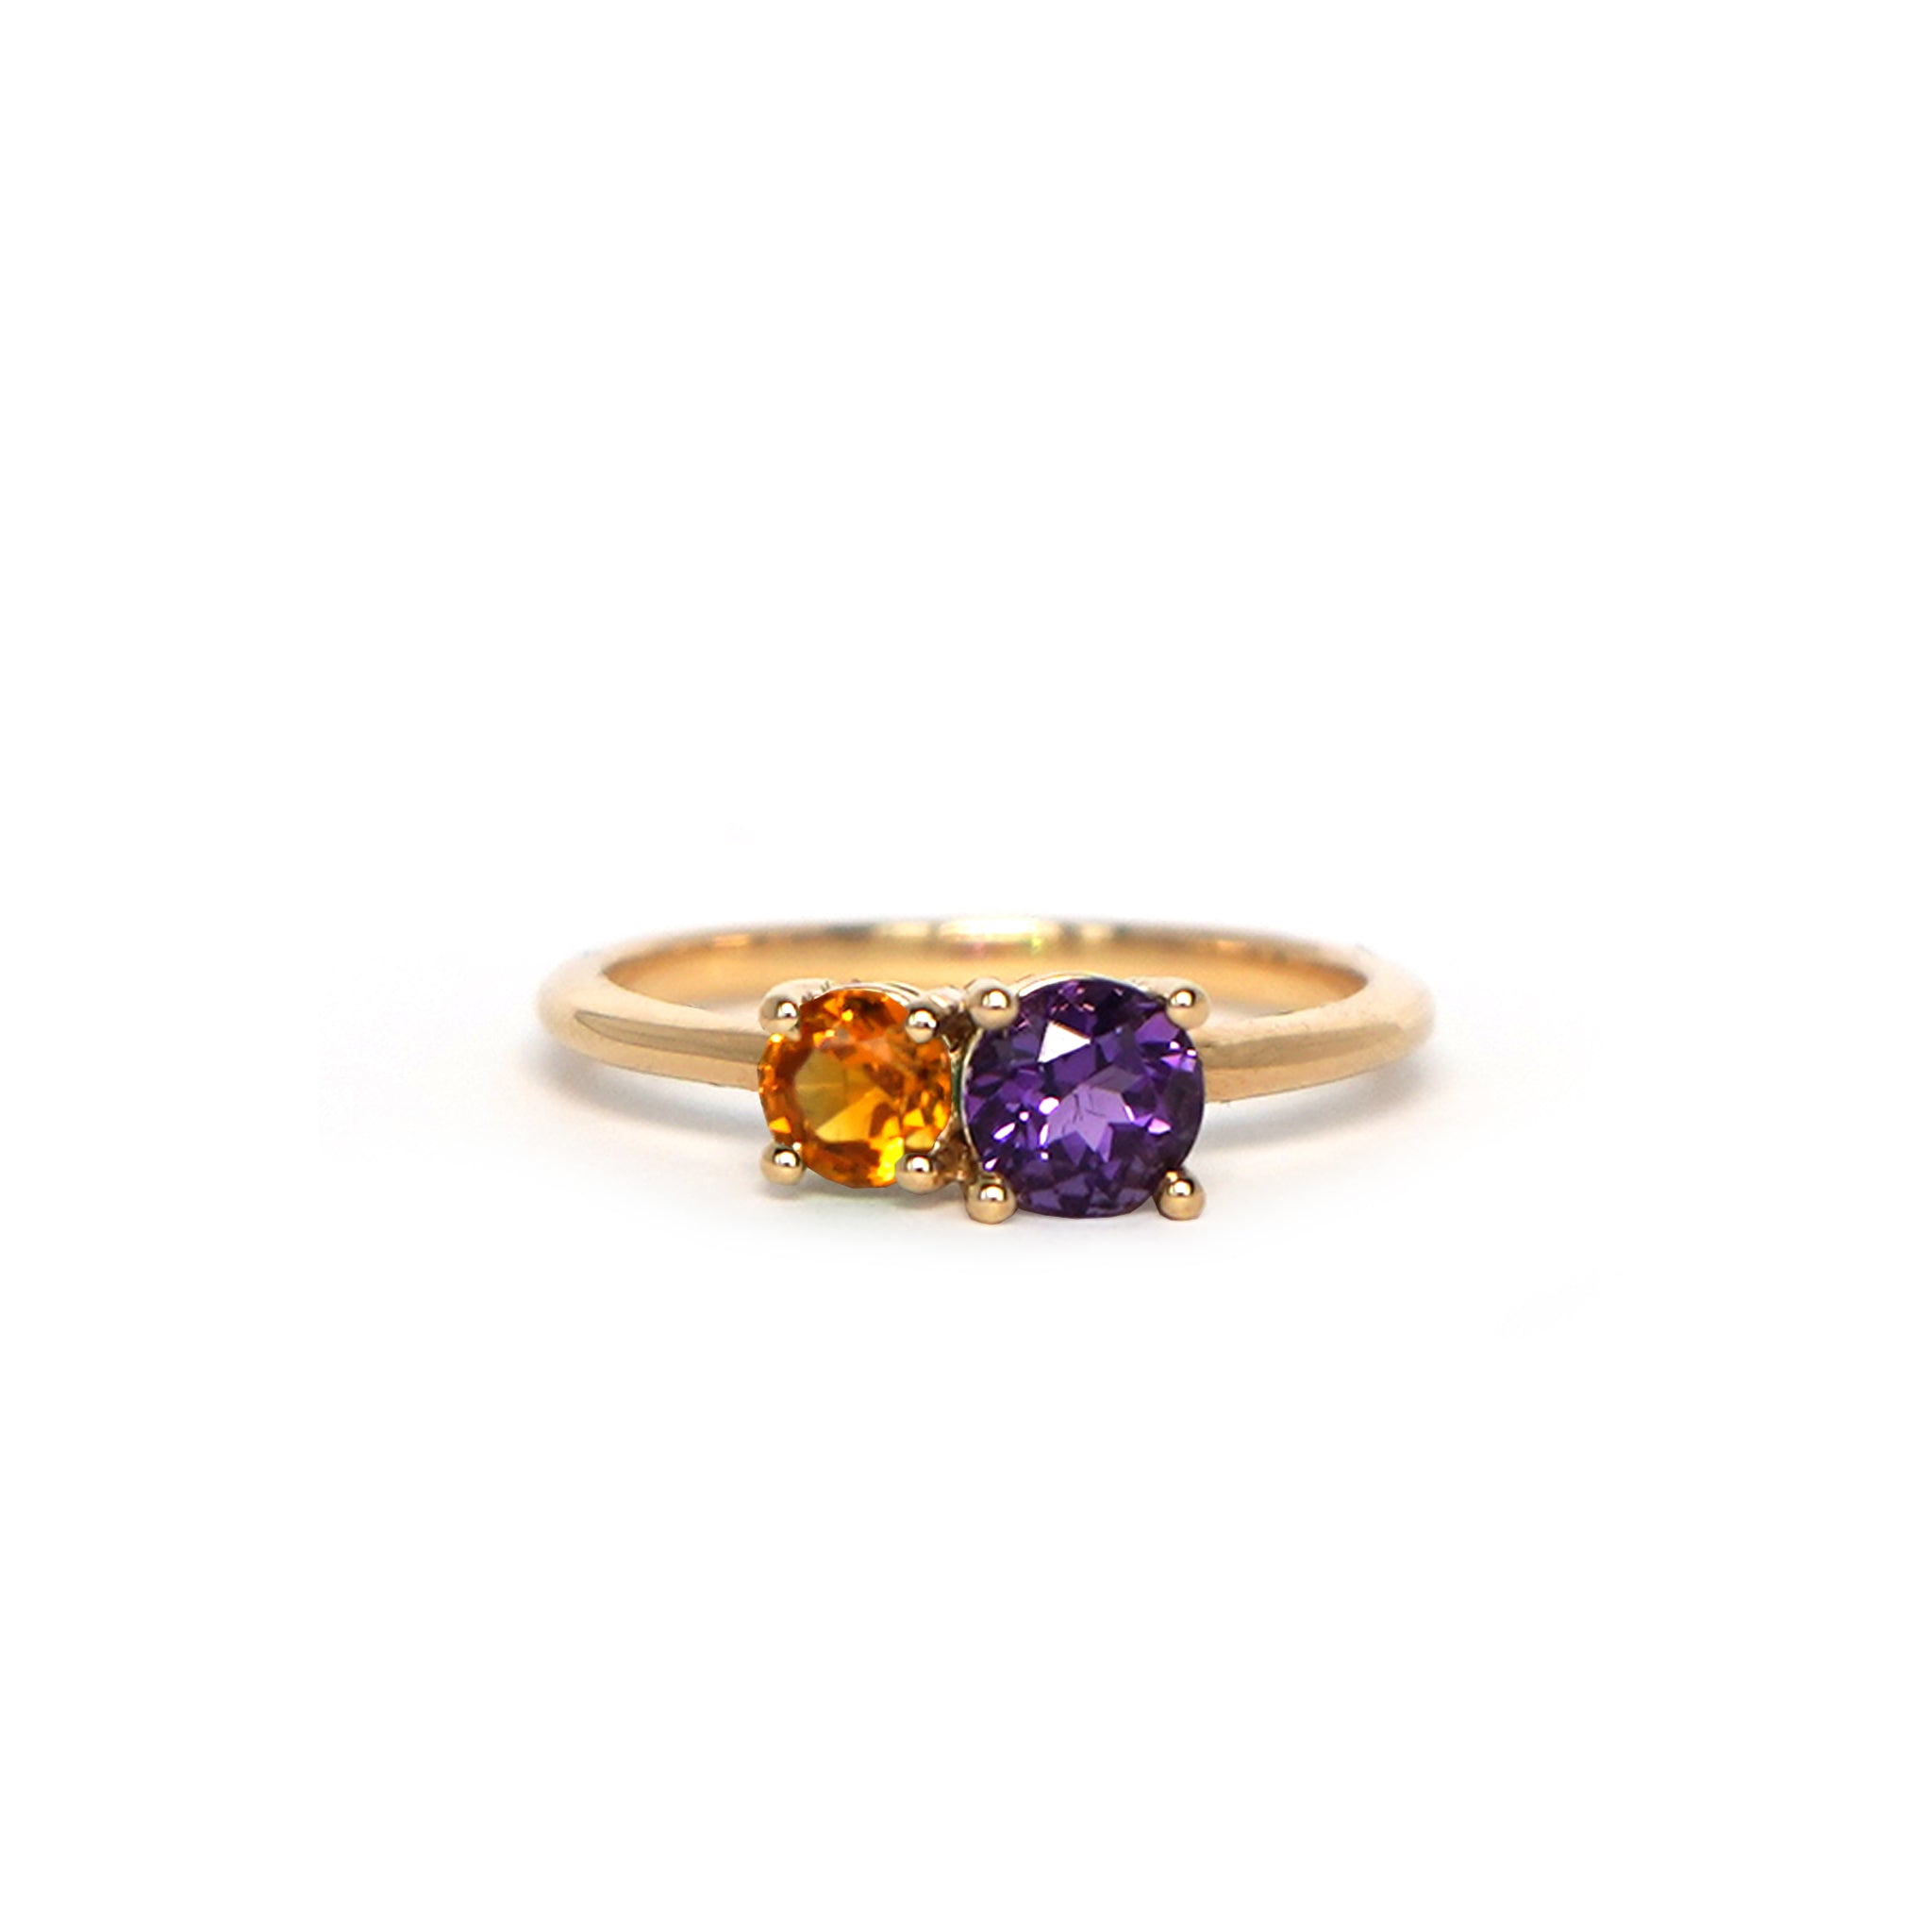 Iris Flower Ring in solid 14k yellow gold with genuine amethyst and citrine from Lico Jewelry Montreal